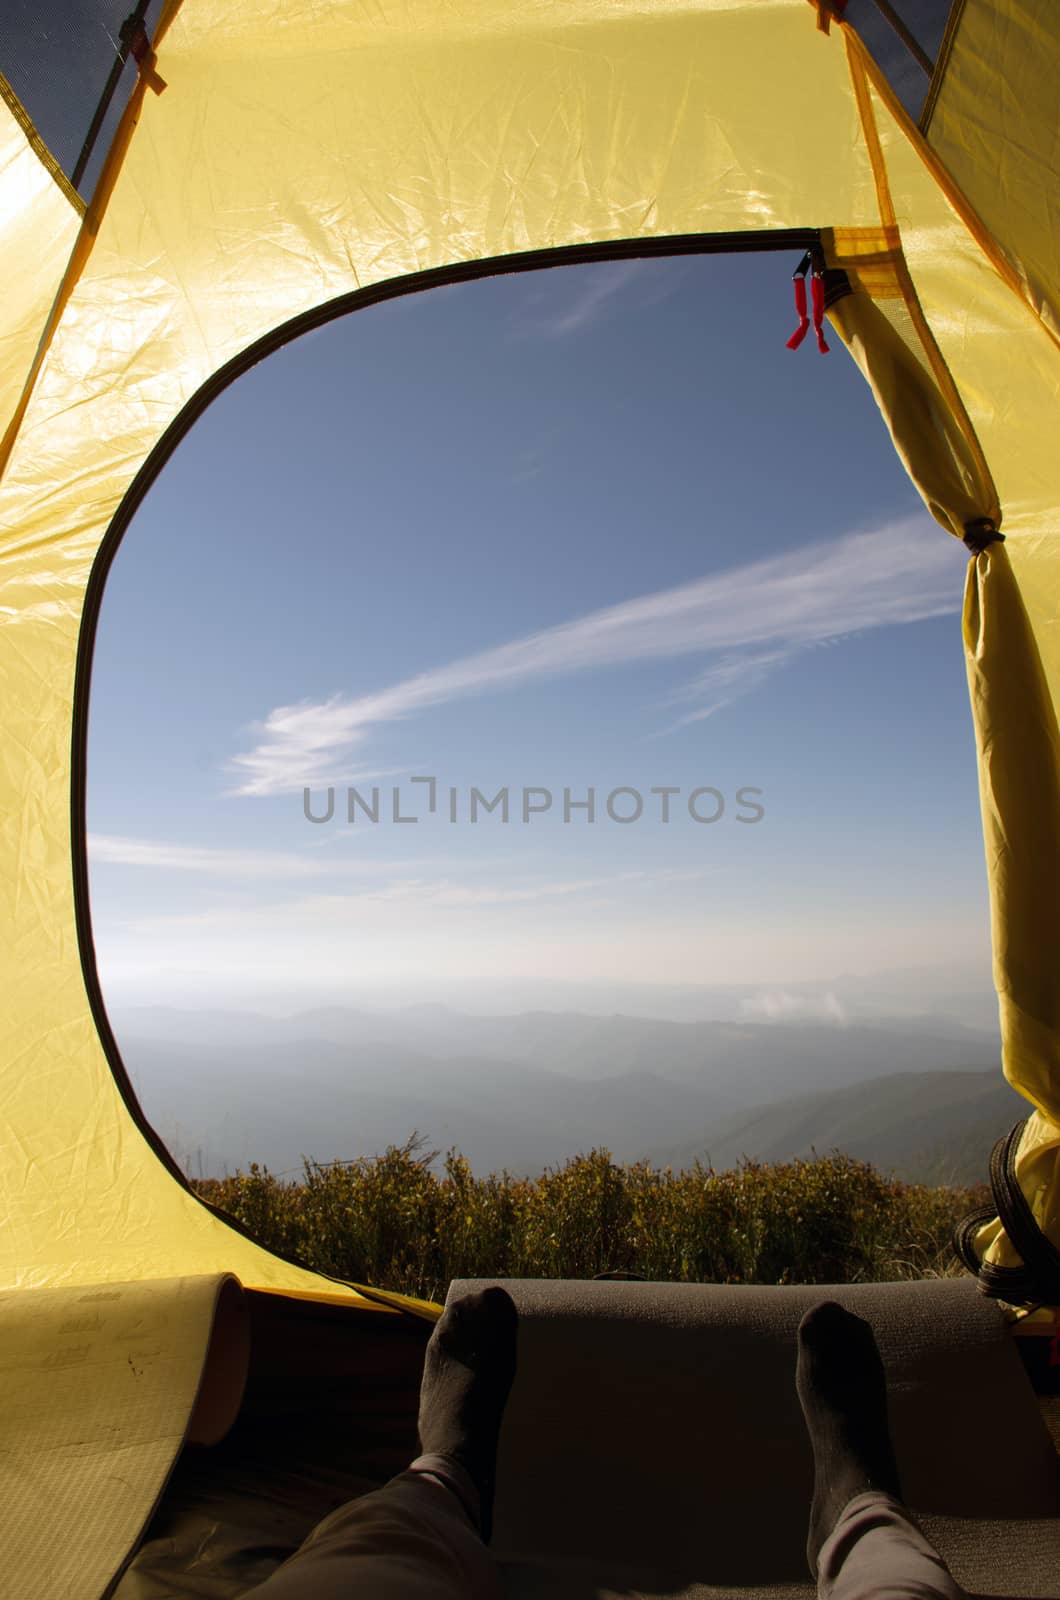 Traveling. Tourism. Tourist tent camping in mount